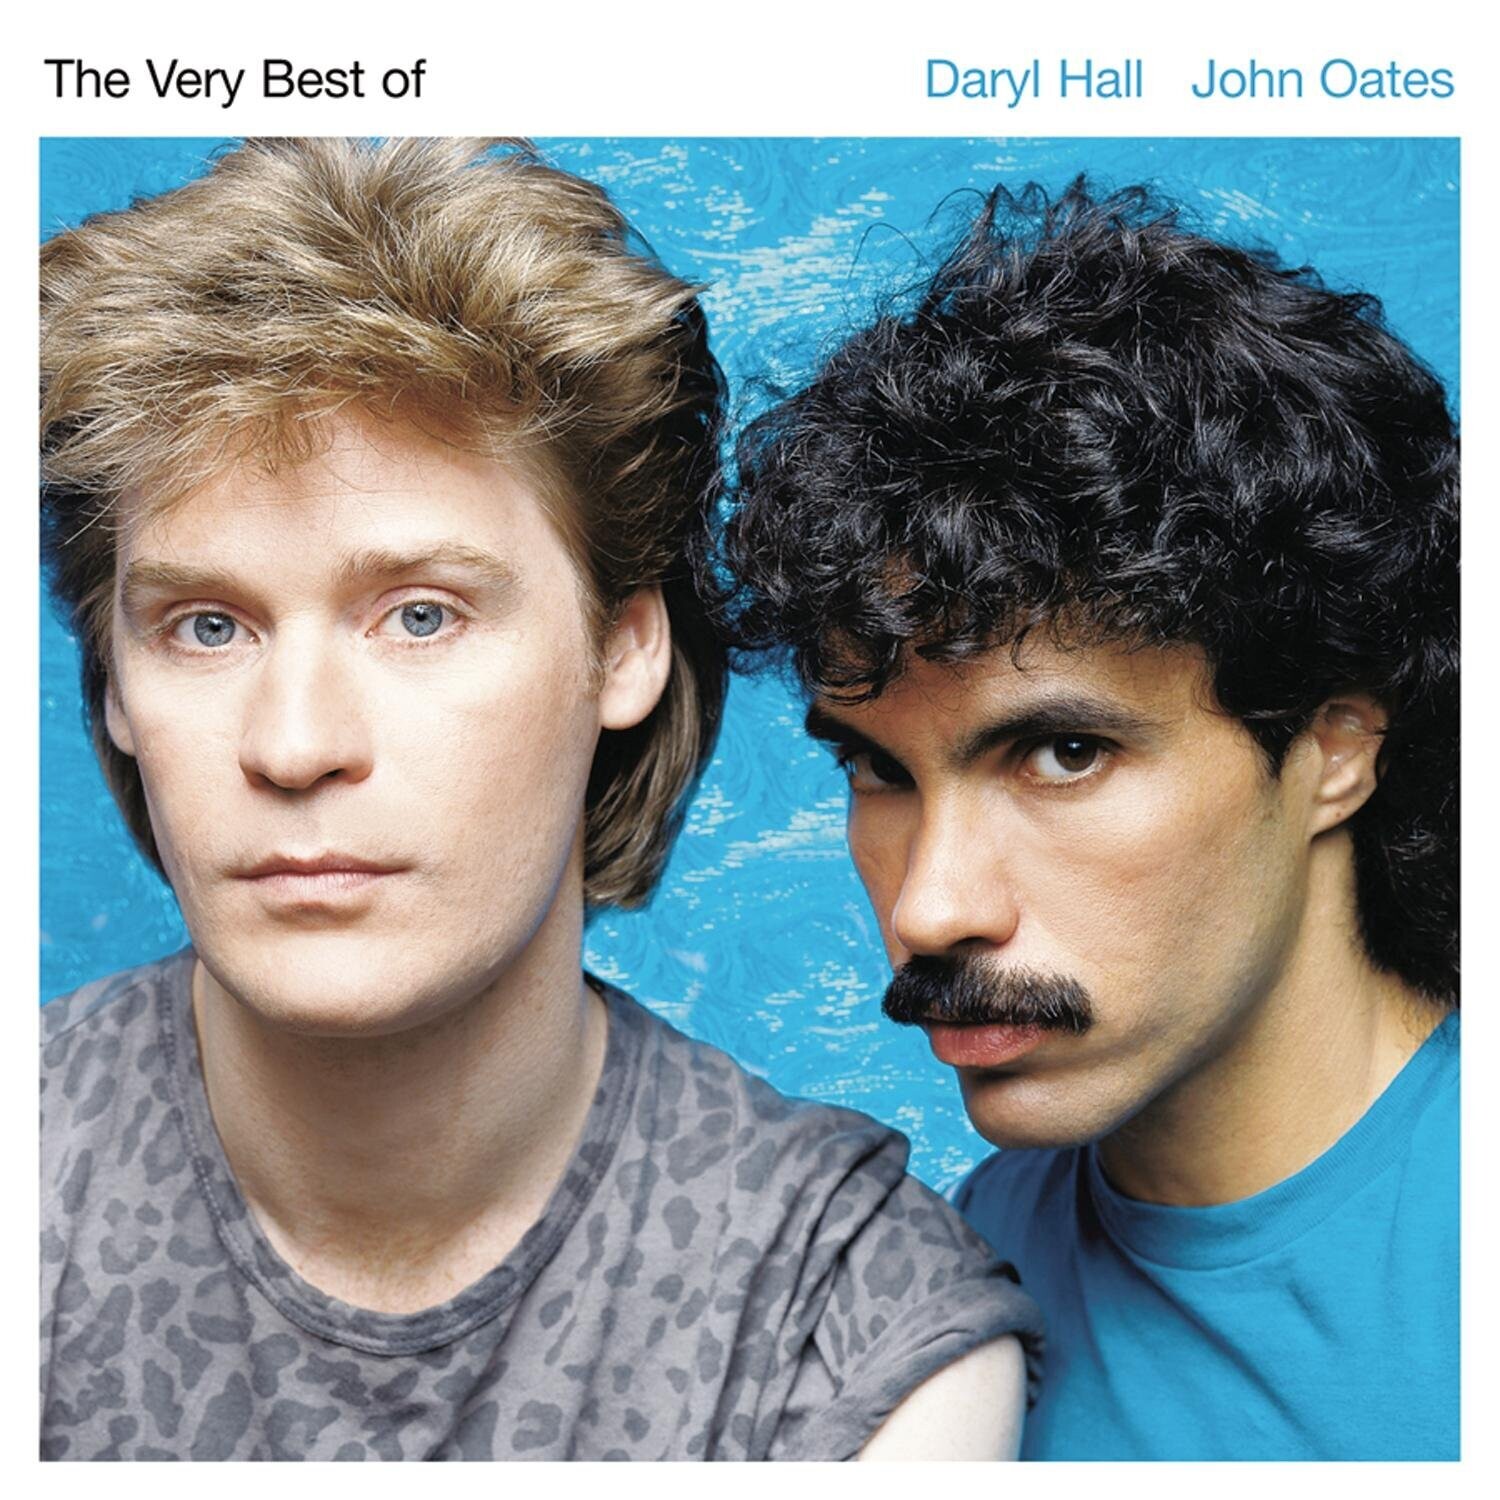 Hall & Oates "The Very Best Of"